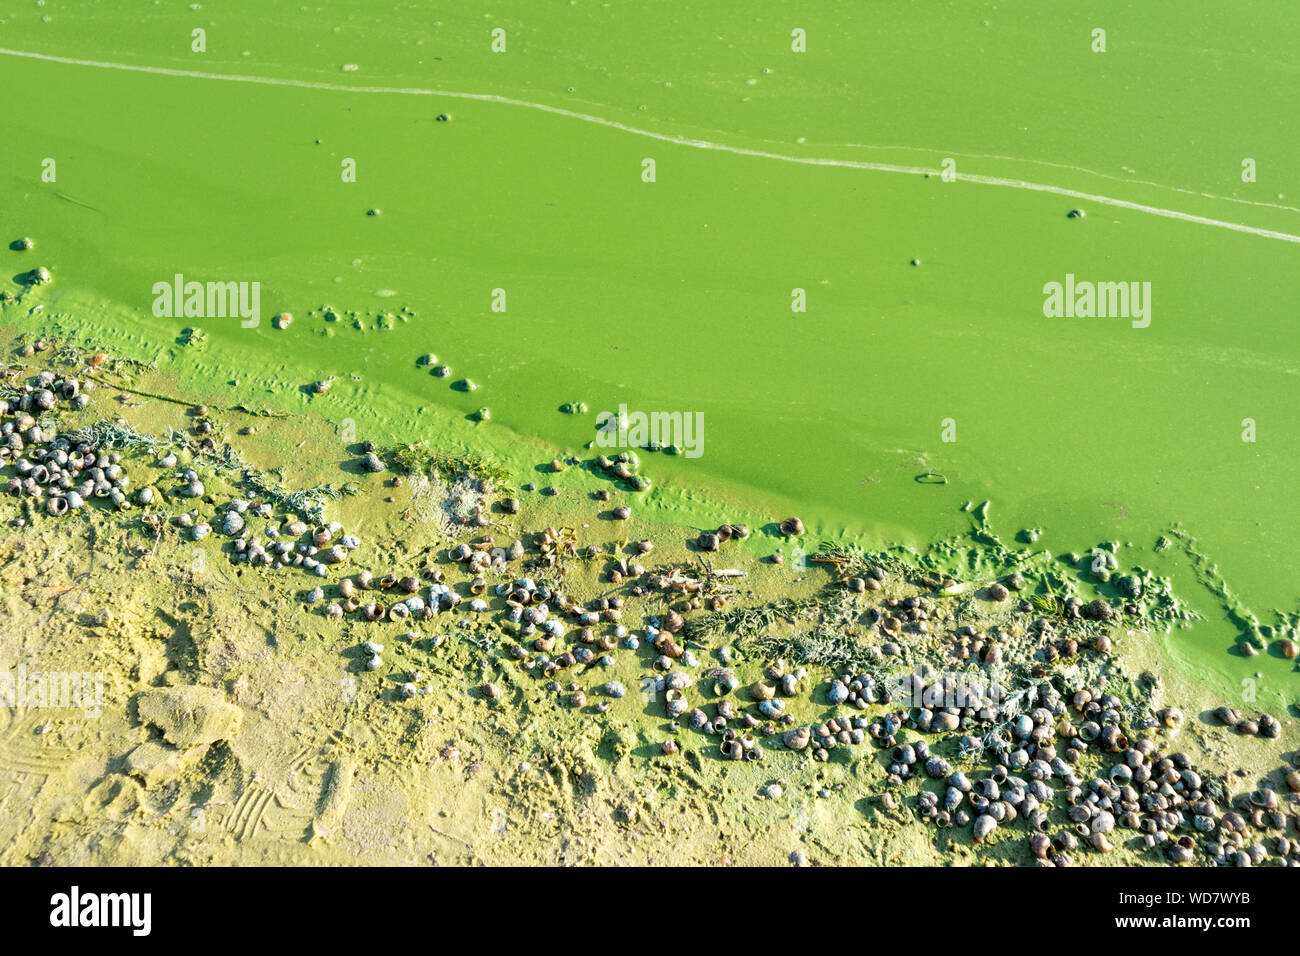 Riverside with algae polluted green water and dead river shells. Stock Photo